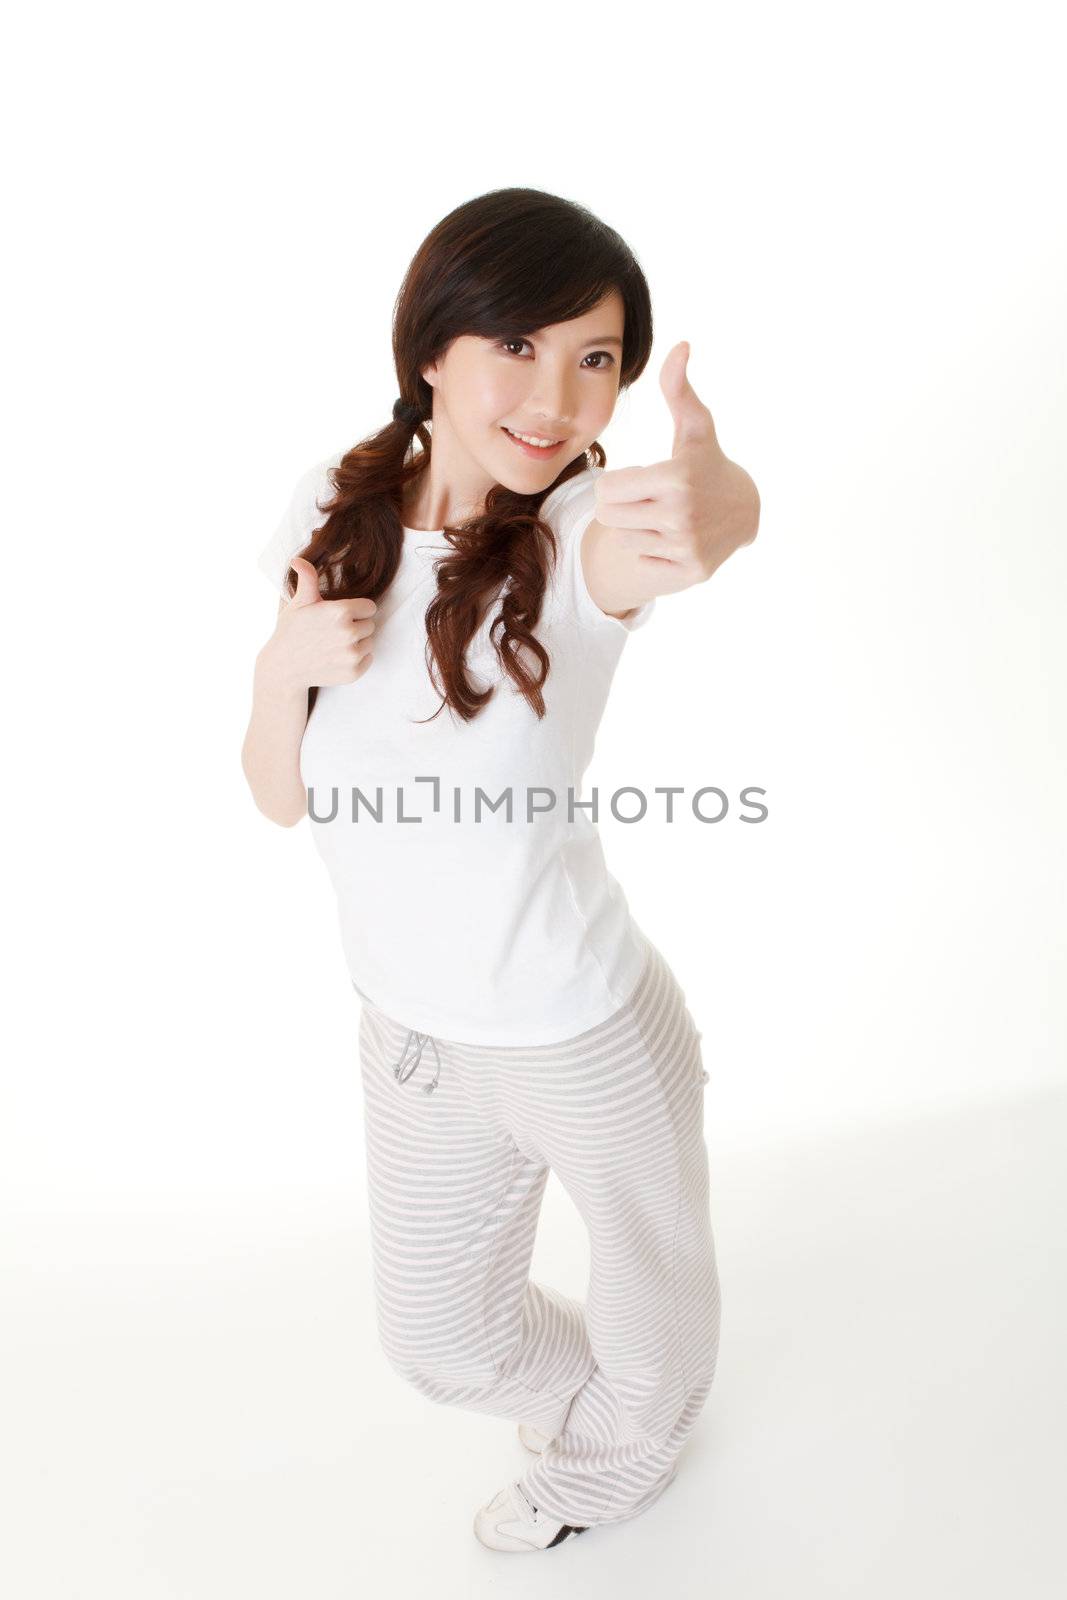 Young beauty give you double excellent gesture, full length portrait in studio white background.